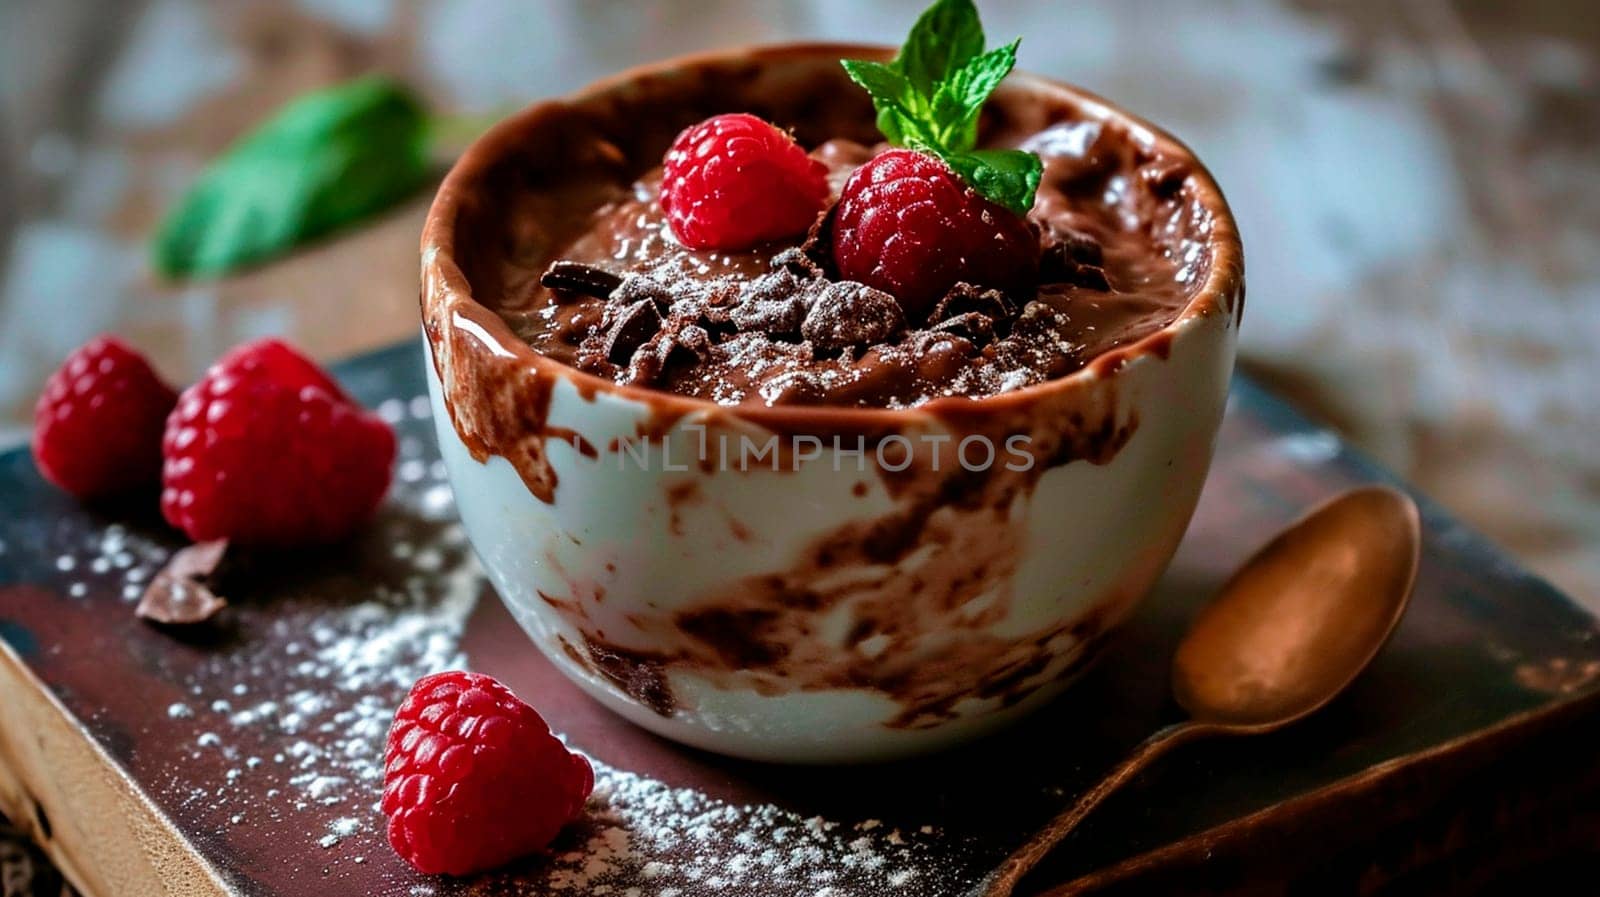 Dessert in a cup with berries. Selective focus. Food.